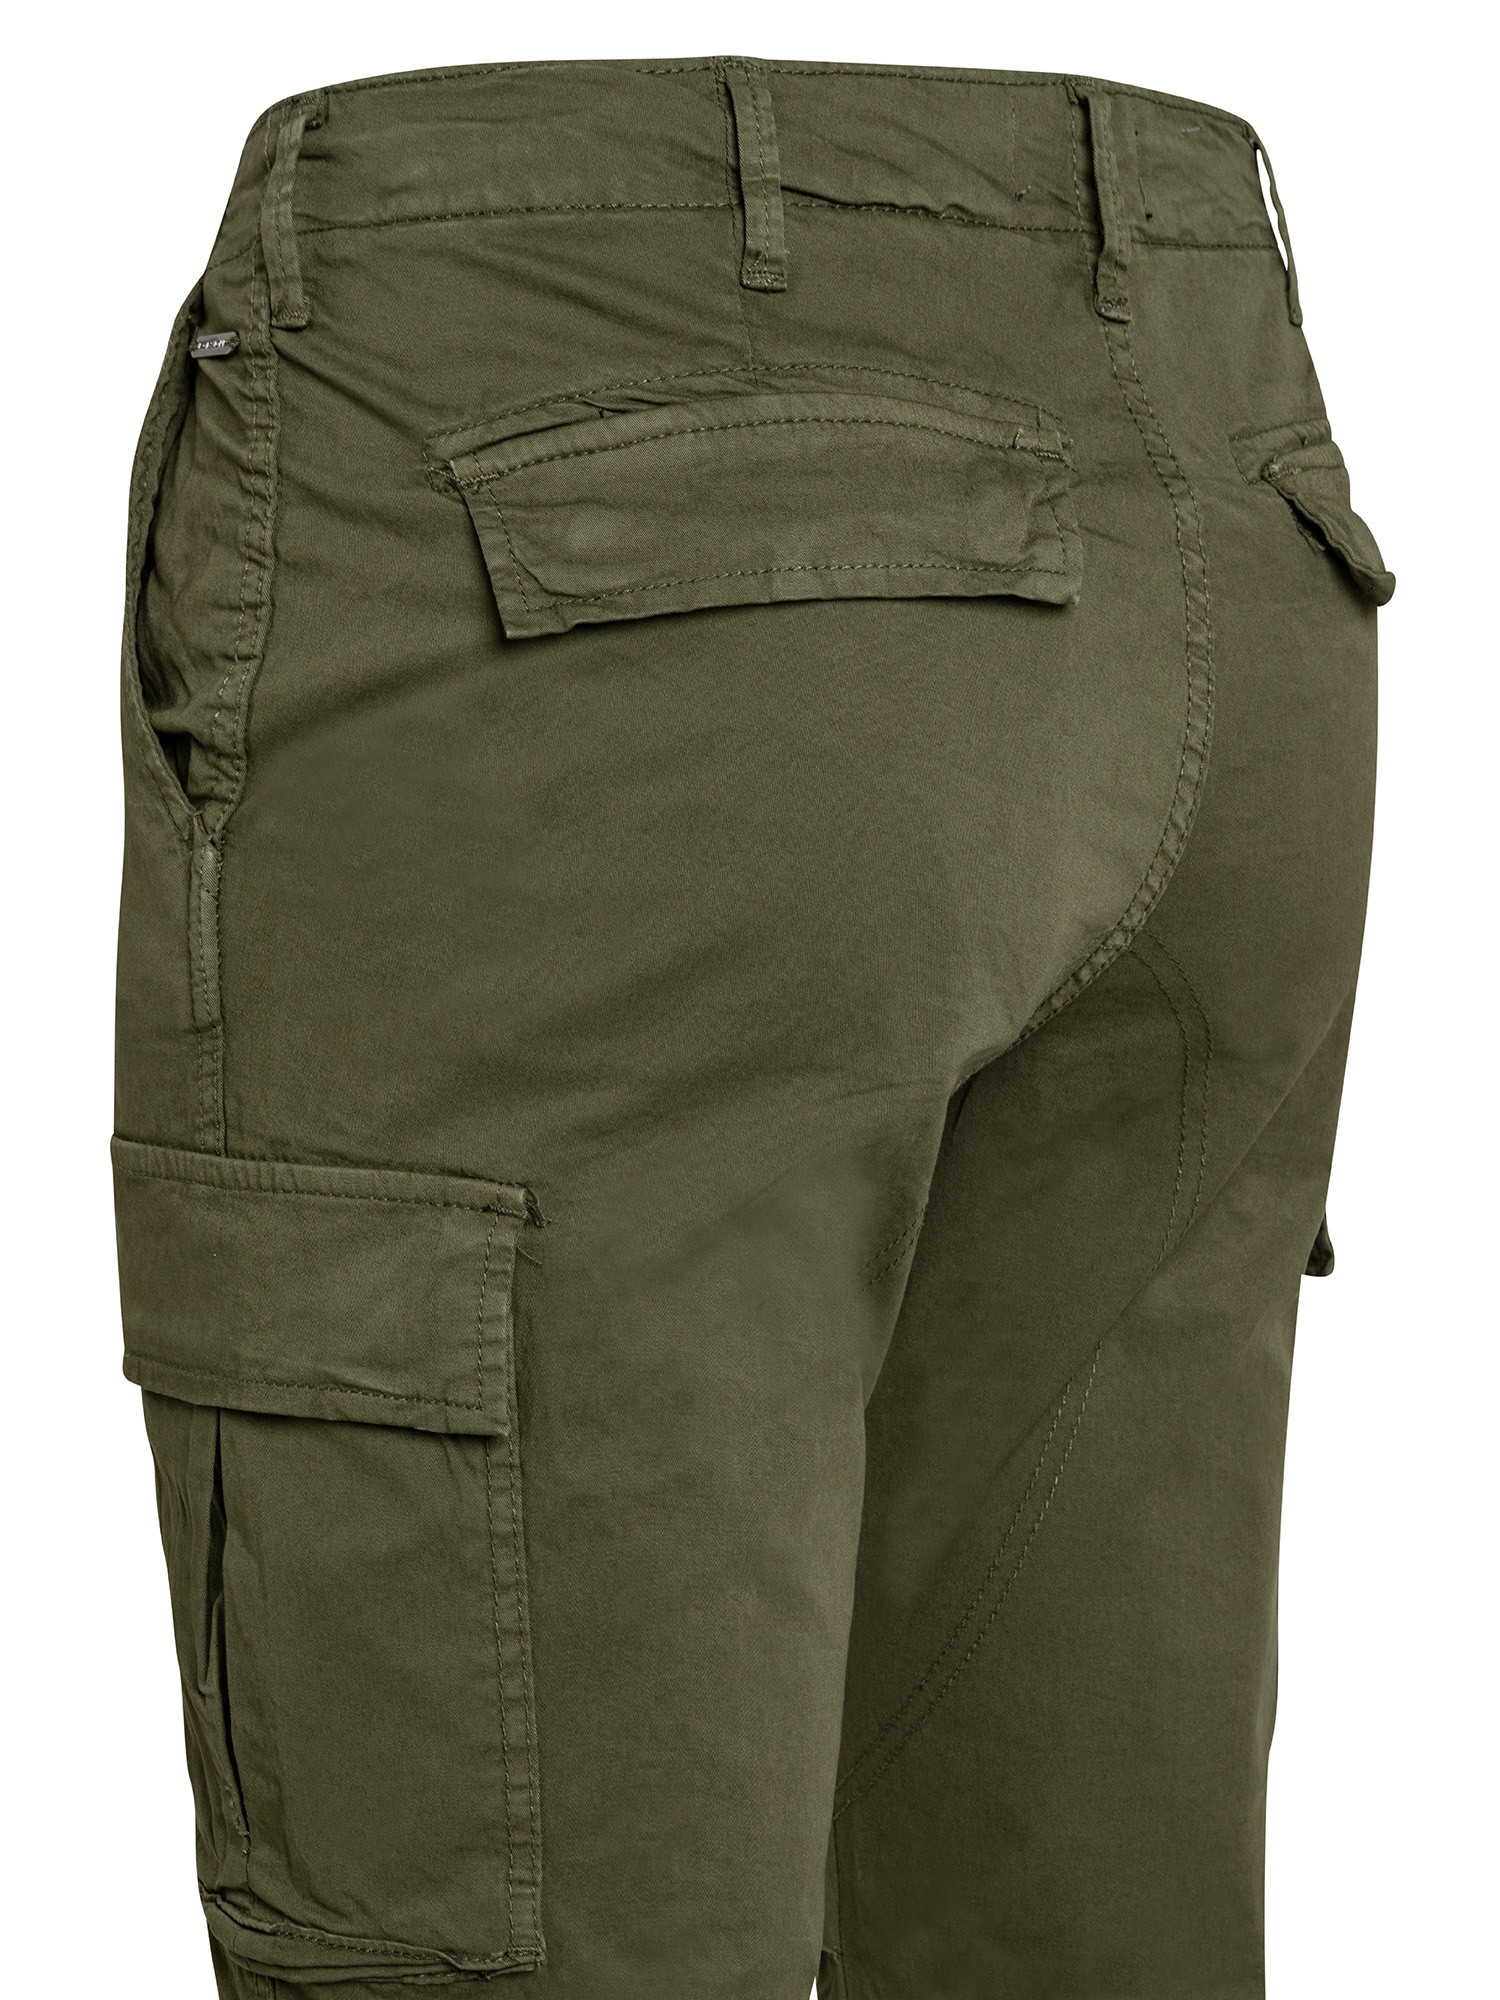 Cargo pants with side pockets, Green, large image number 2